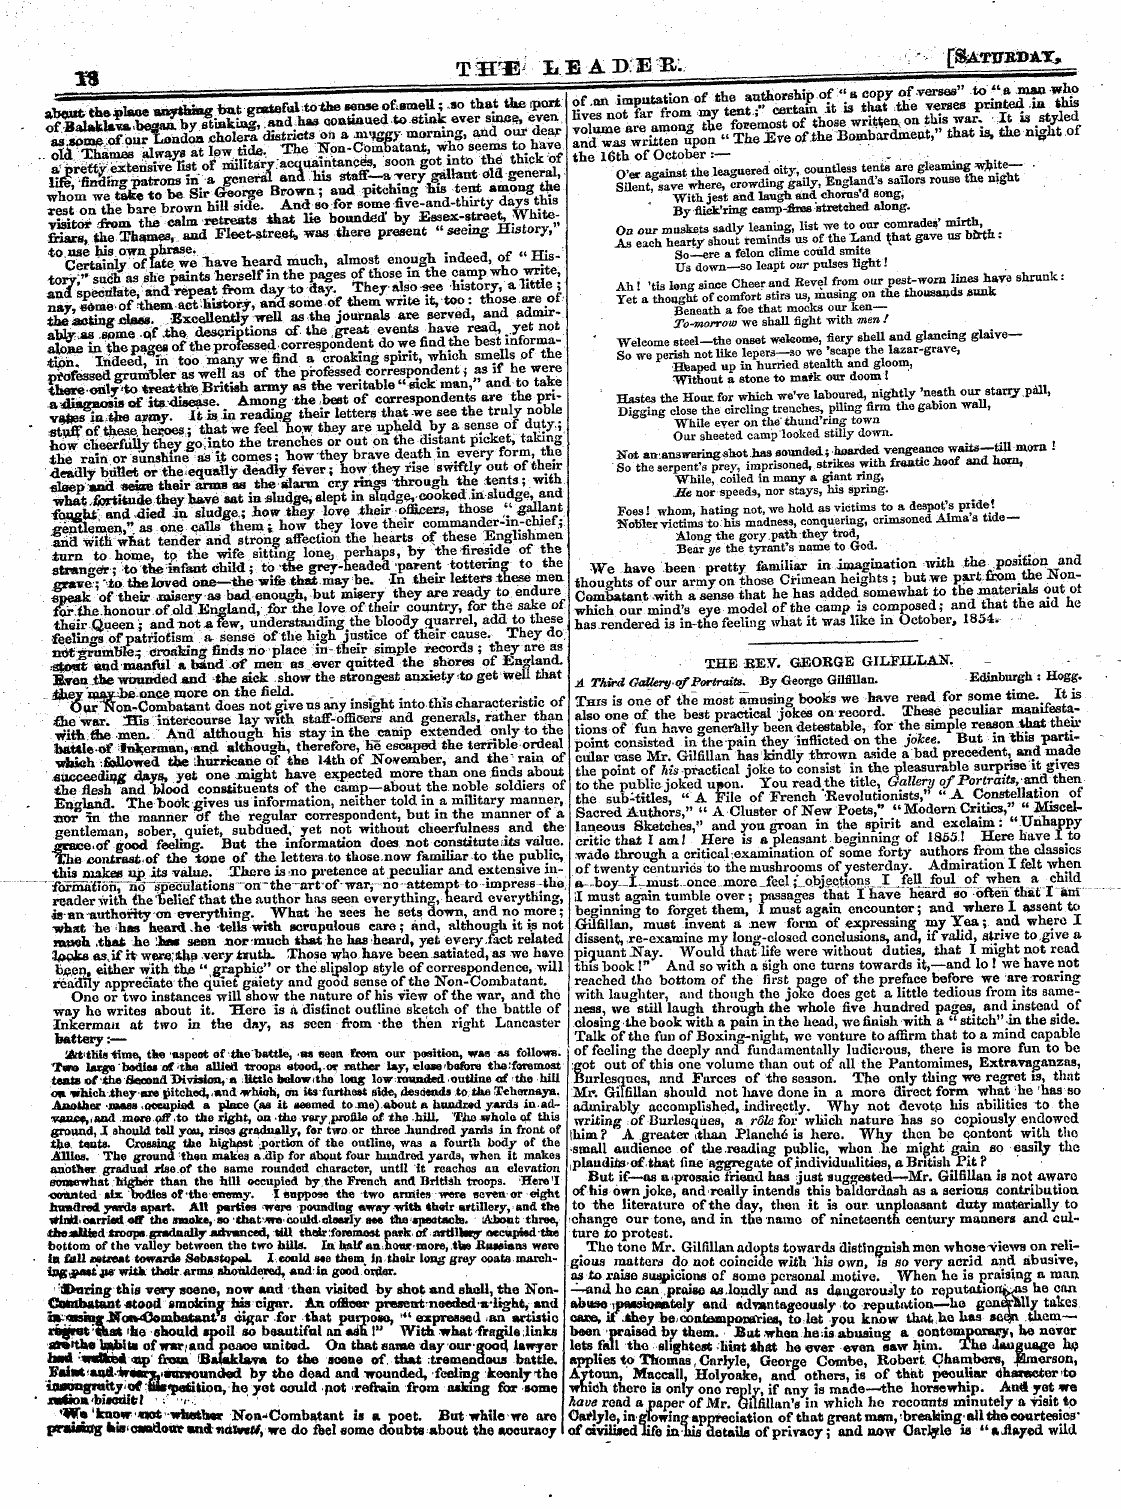 Leader (1850-1860): jS F Y, 2nd edition: 18